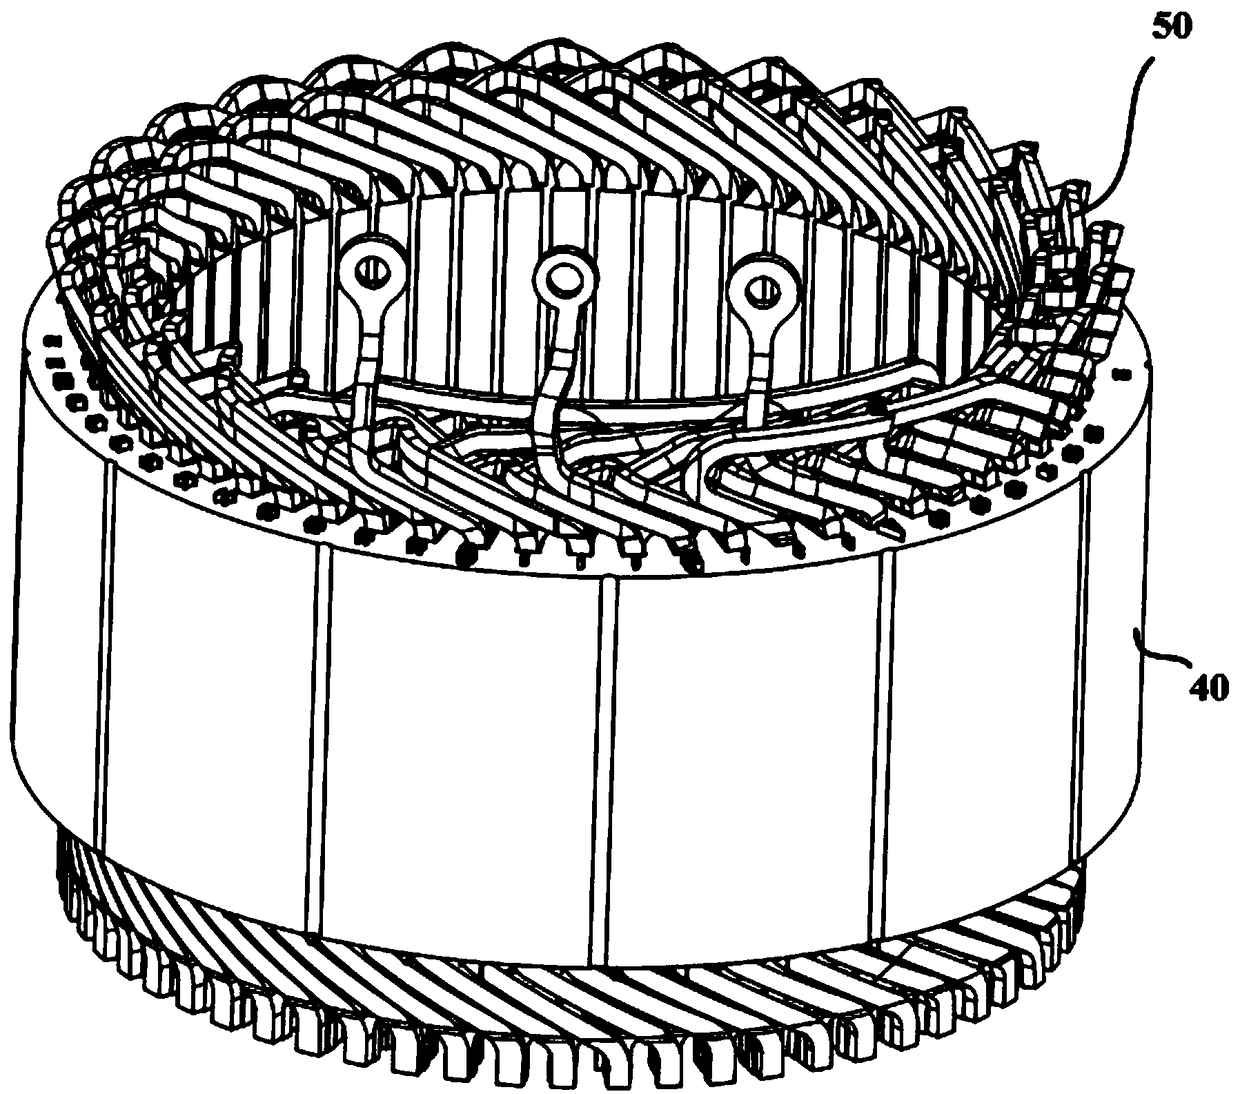 Flat wire stator winding structure of motor